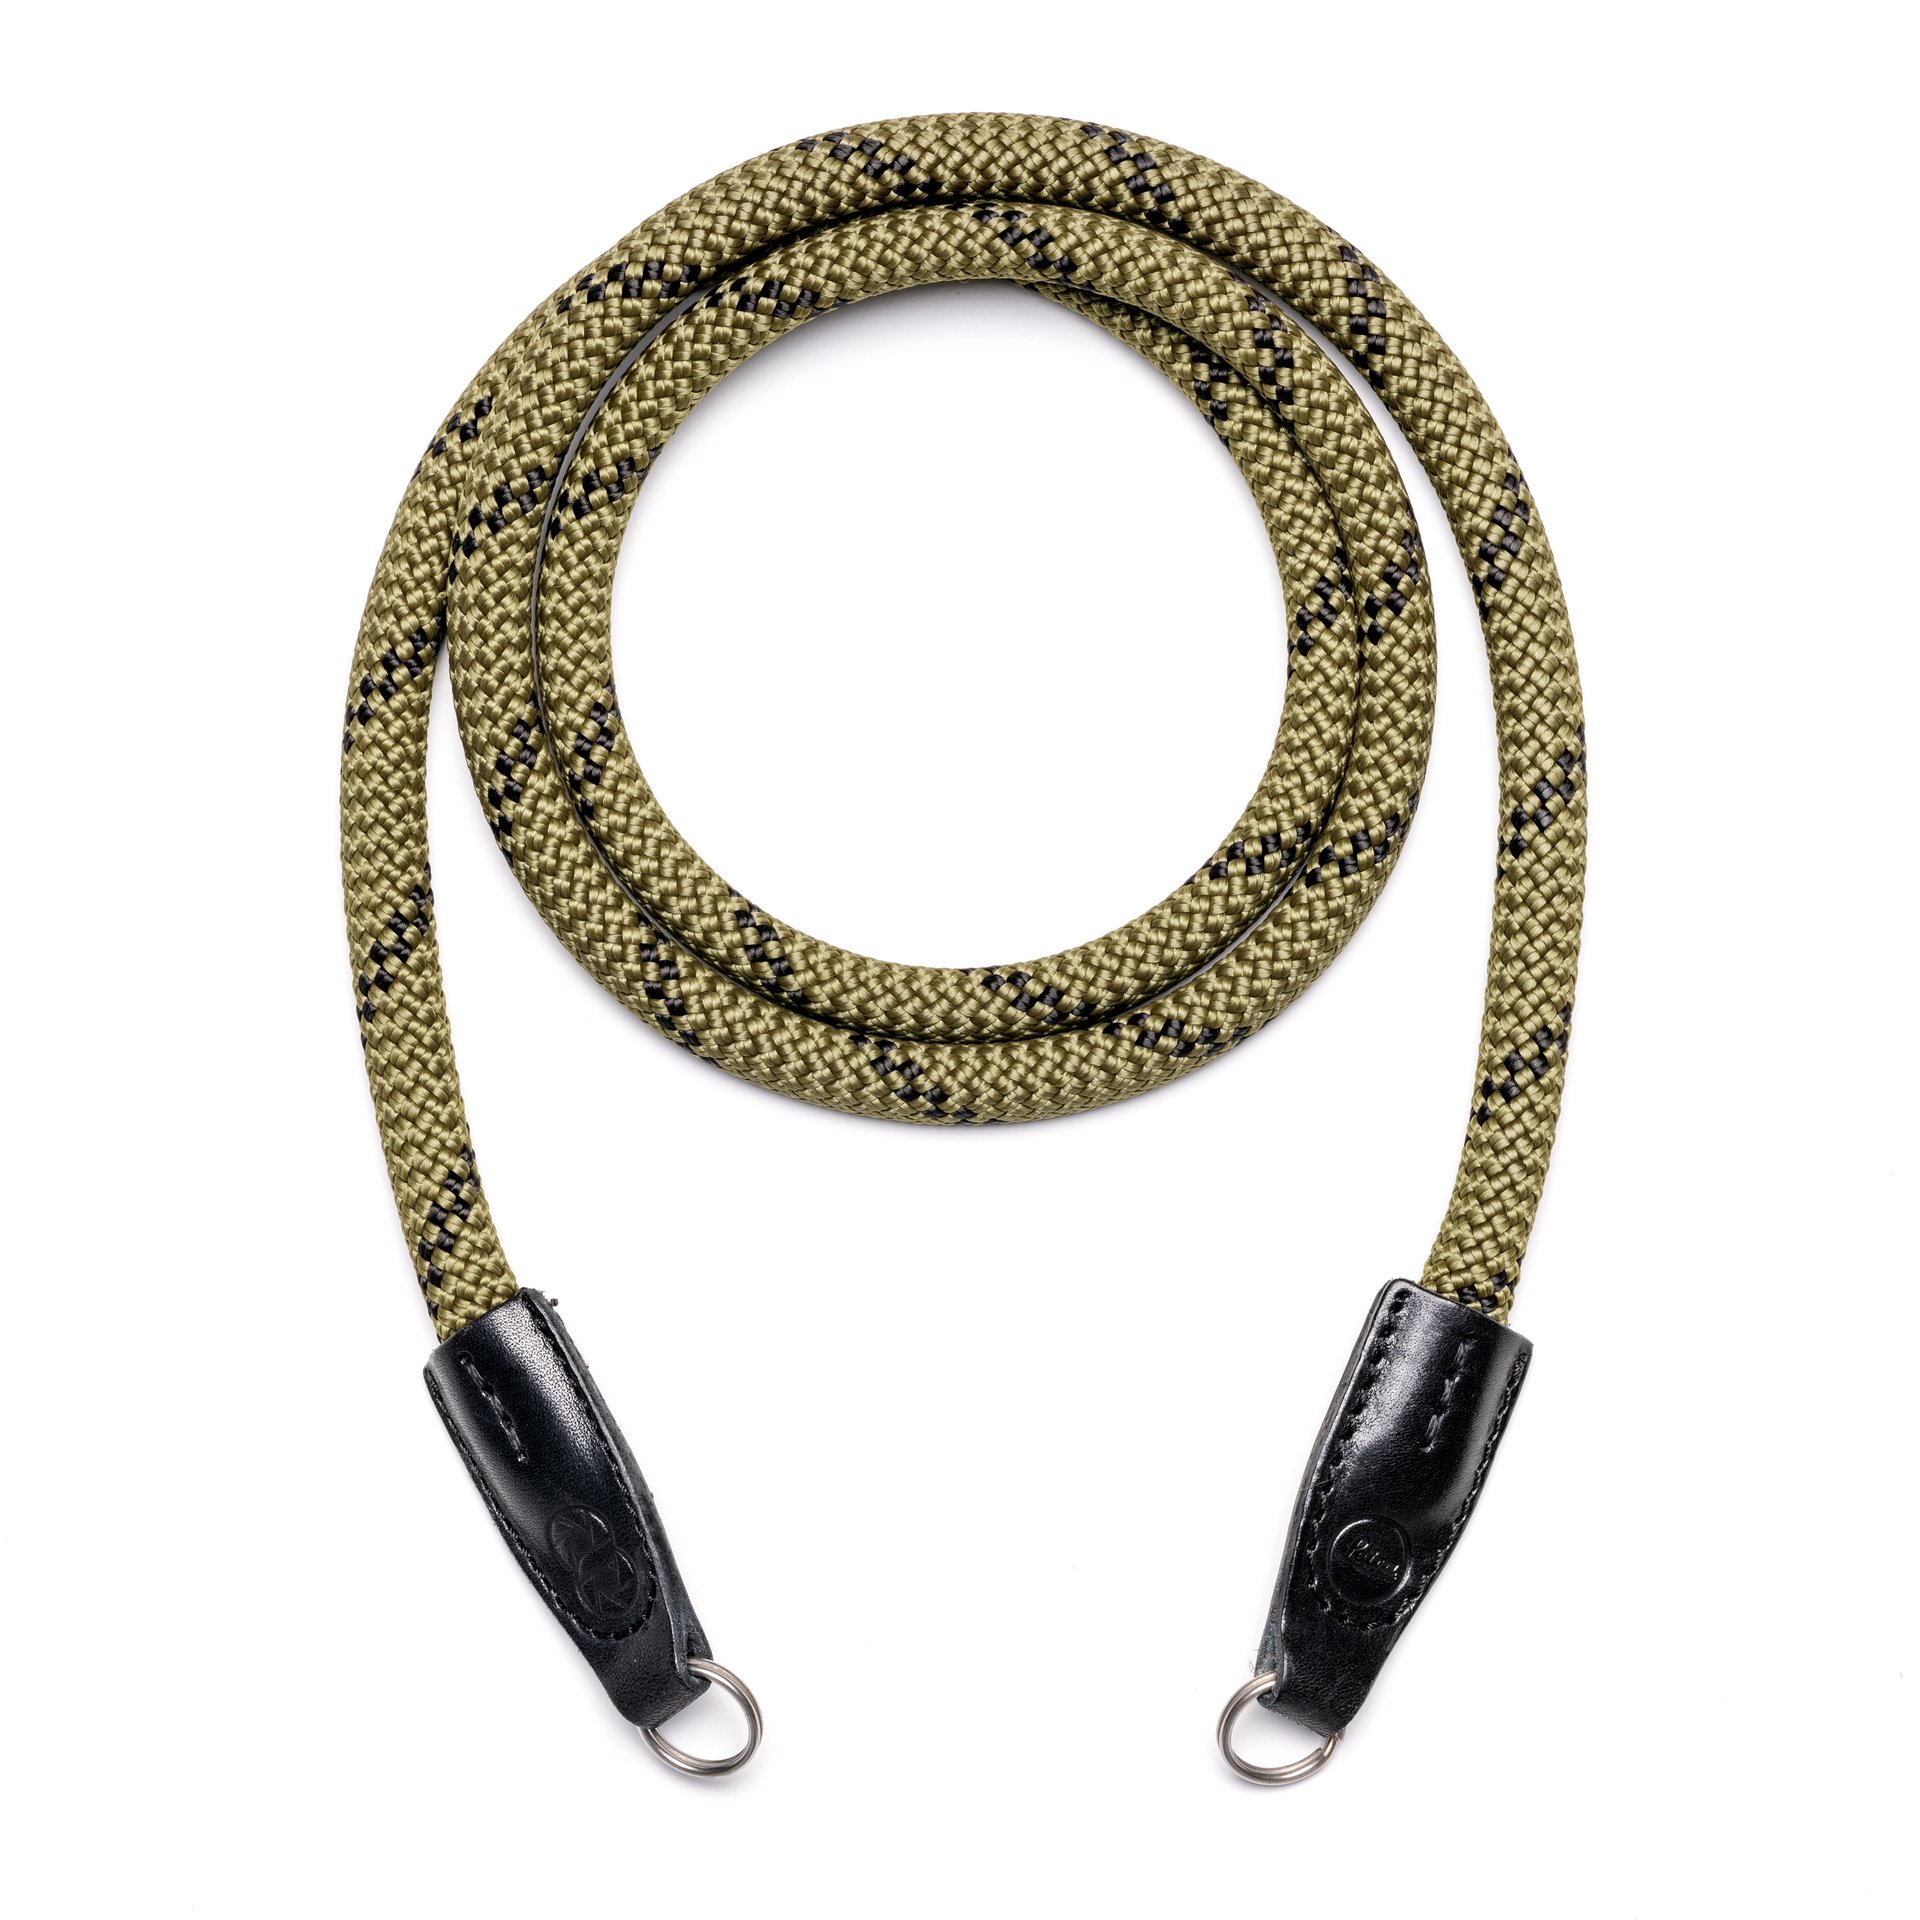 TThumbnail image for LEICA COOPH ROPE STRAP - OLIVE